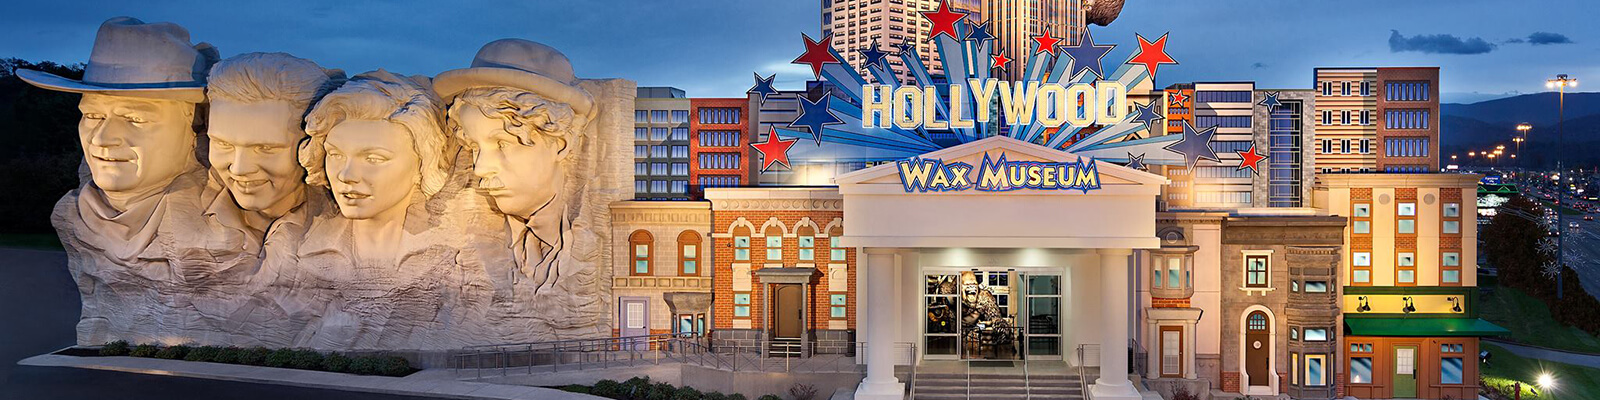 Hollywood Wax Museum Pigeon Forge Coupons